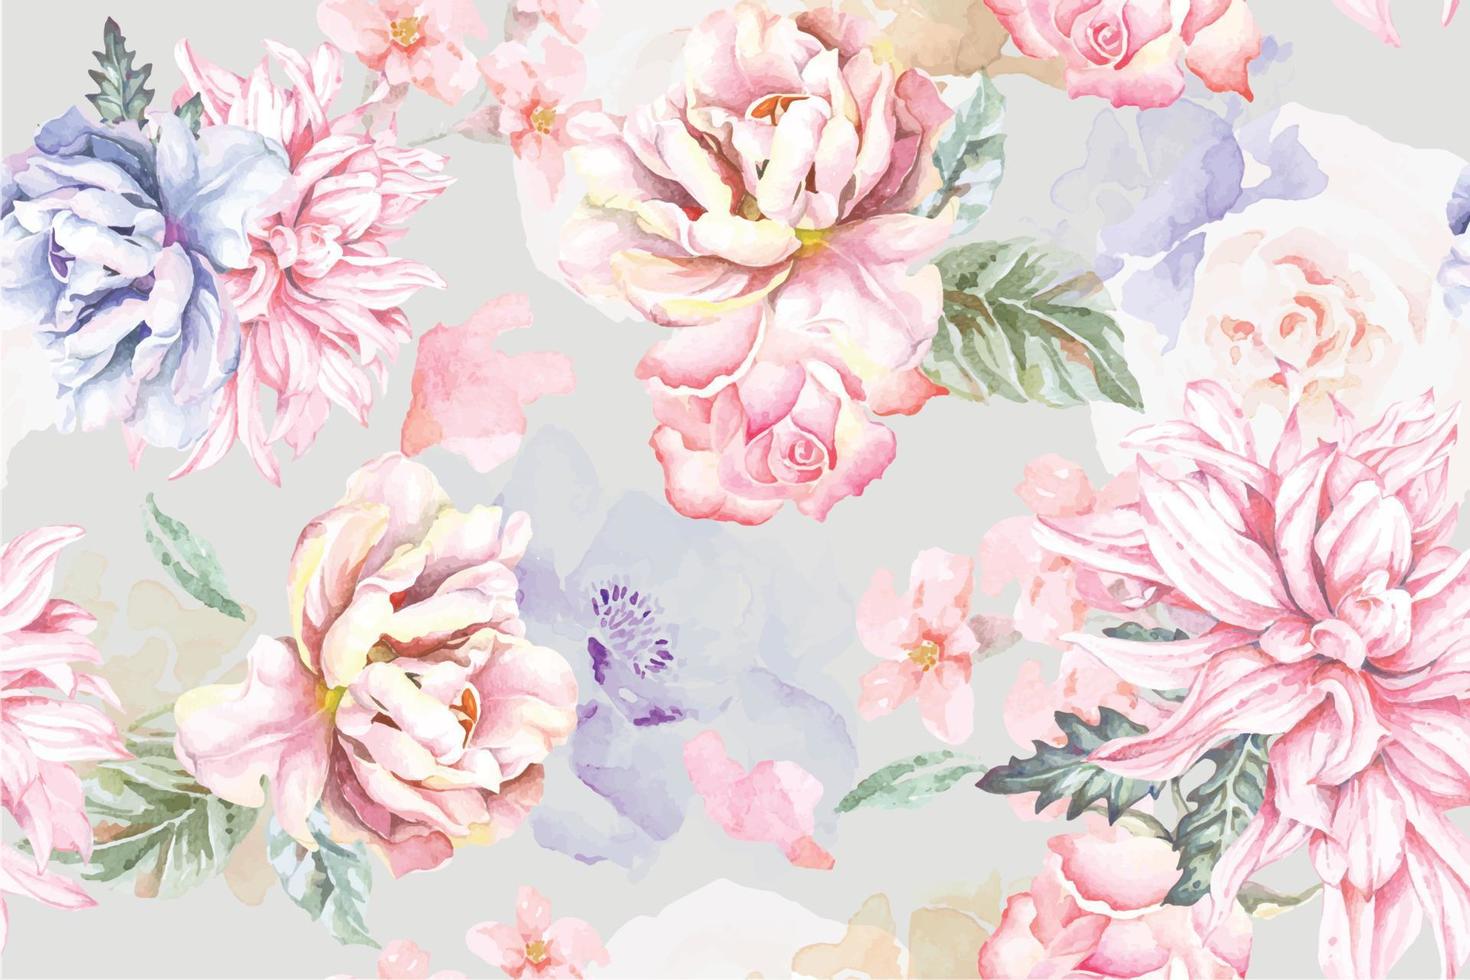 Seamless pattern of blooming flowers painted in watercolor.Designed for fabric luxurious and wallpaper, vintage style.Hand drawn botanical floral pattern. vector